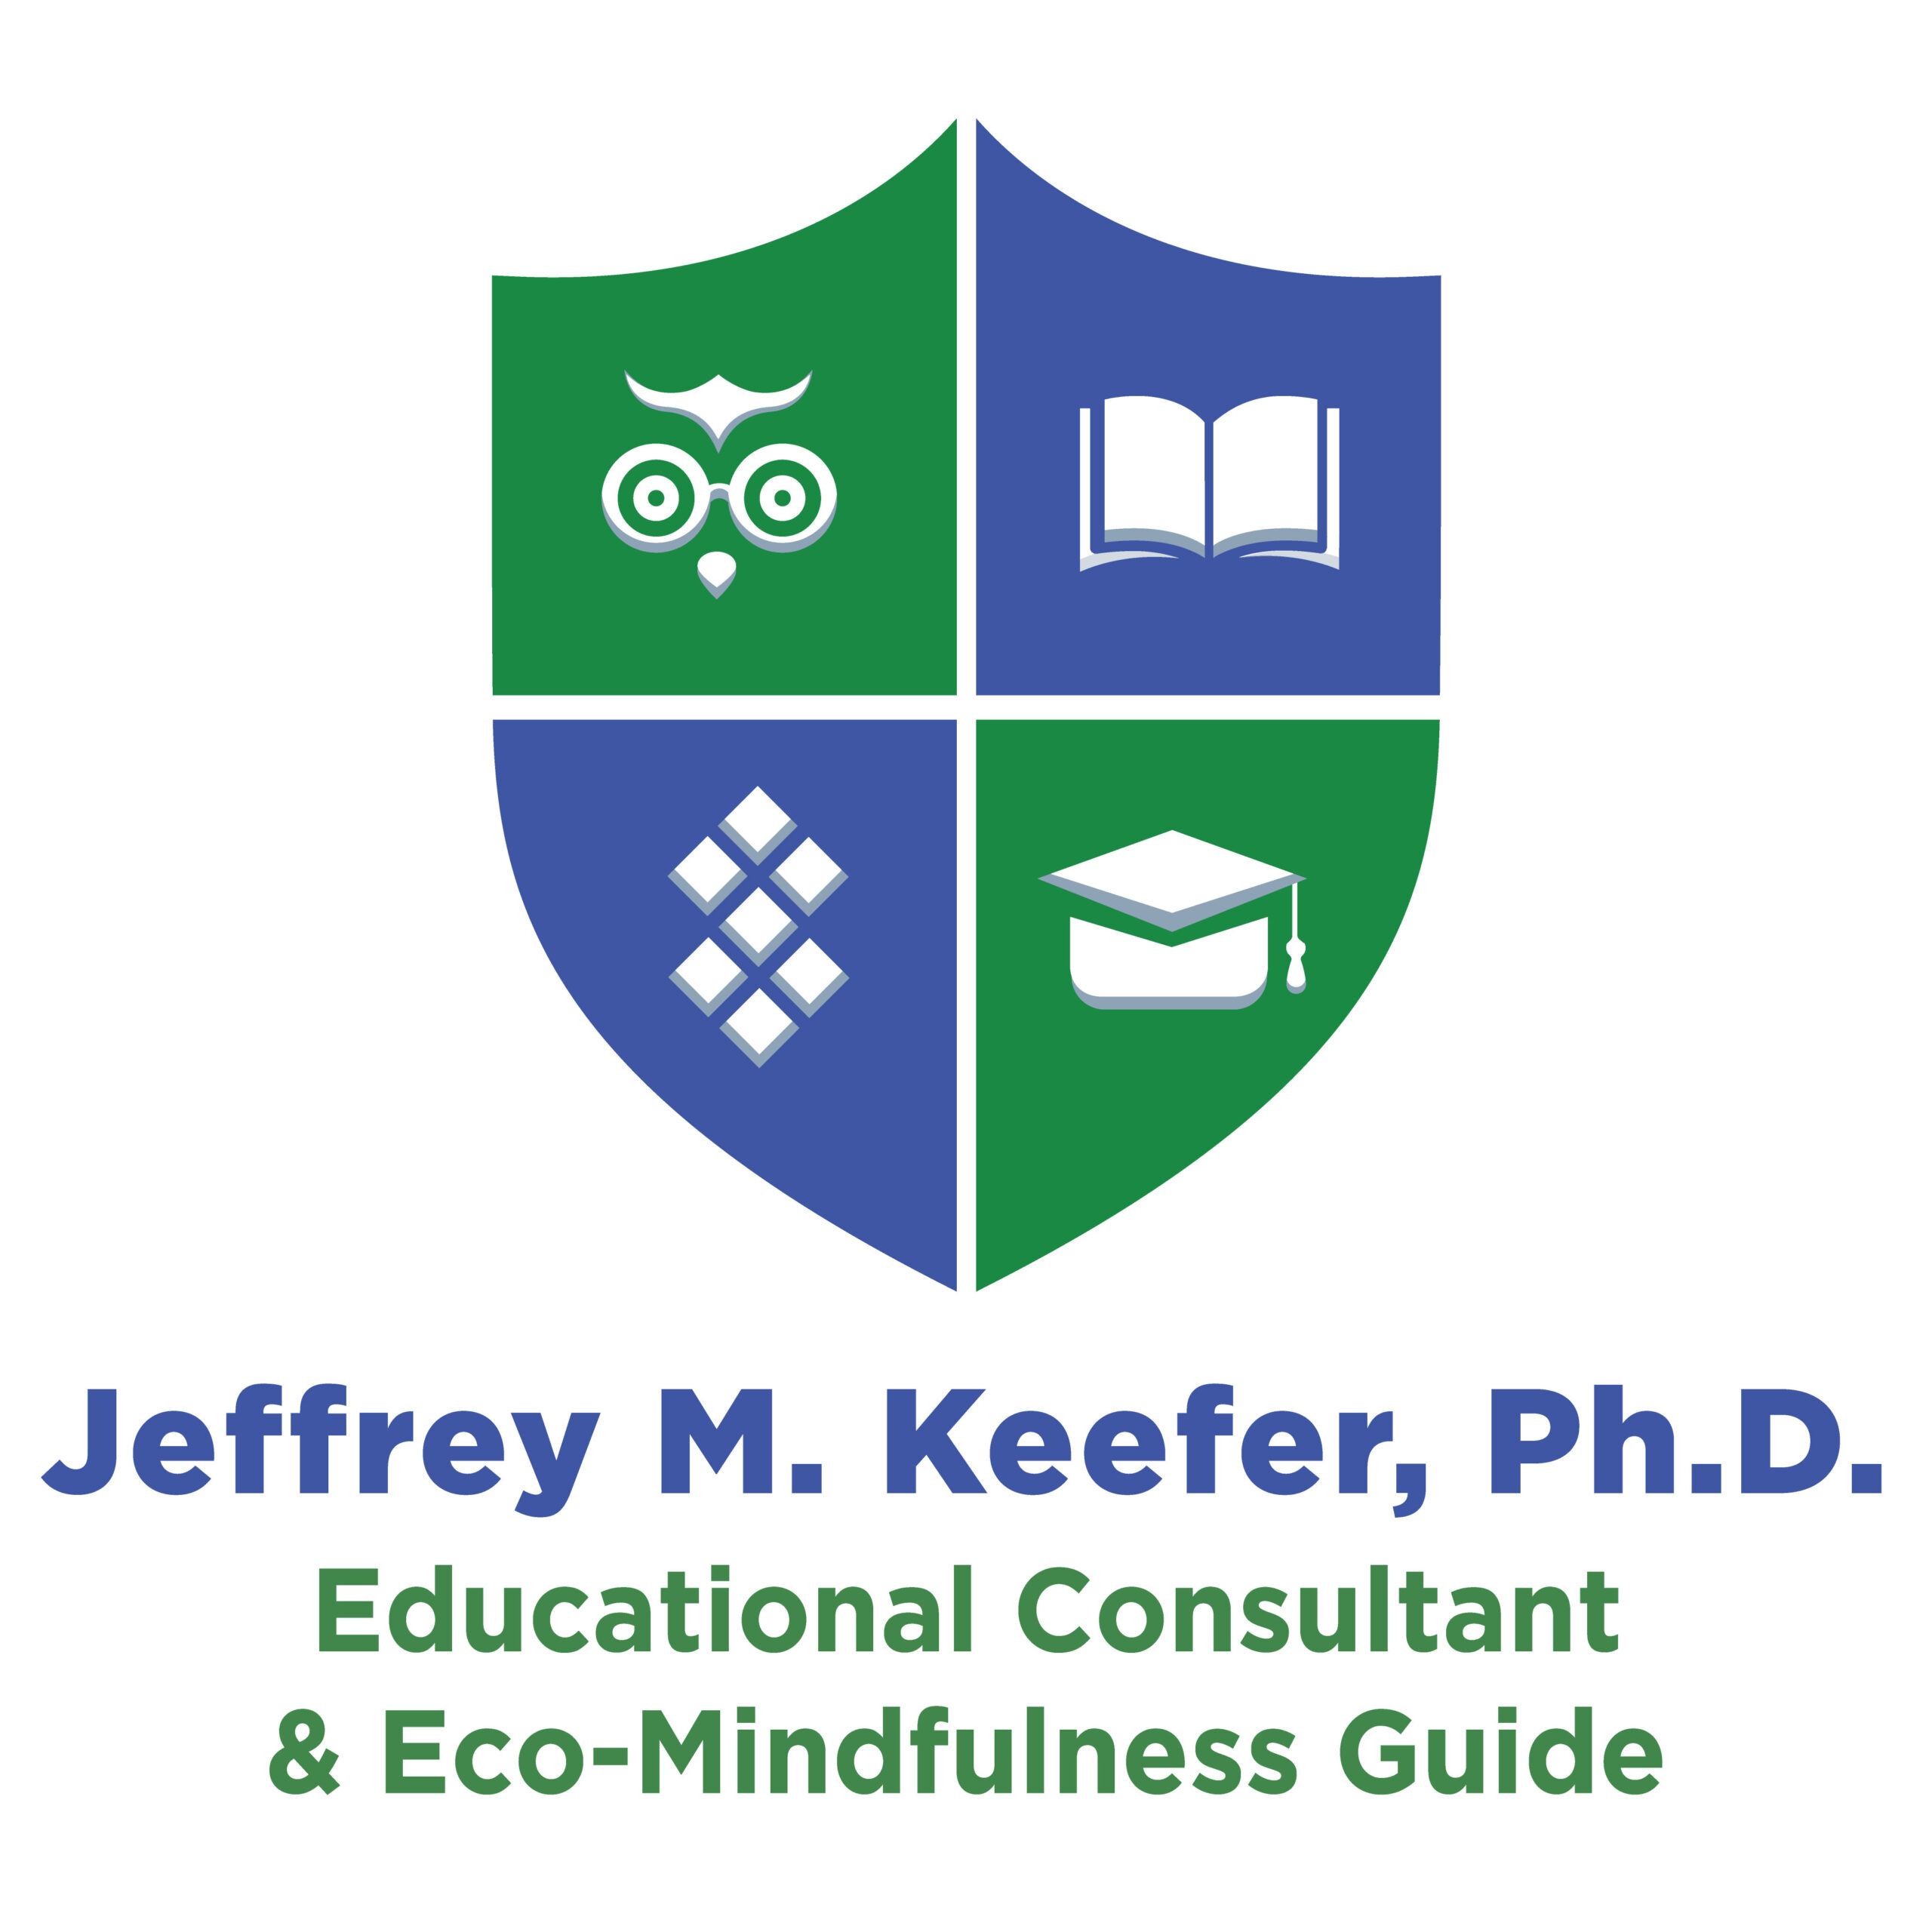 Jeffrey M. Keefer, Ph.D.<br />
Educational Consultant<br />
& Eco-Mindfulness Guide